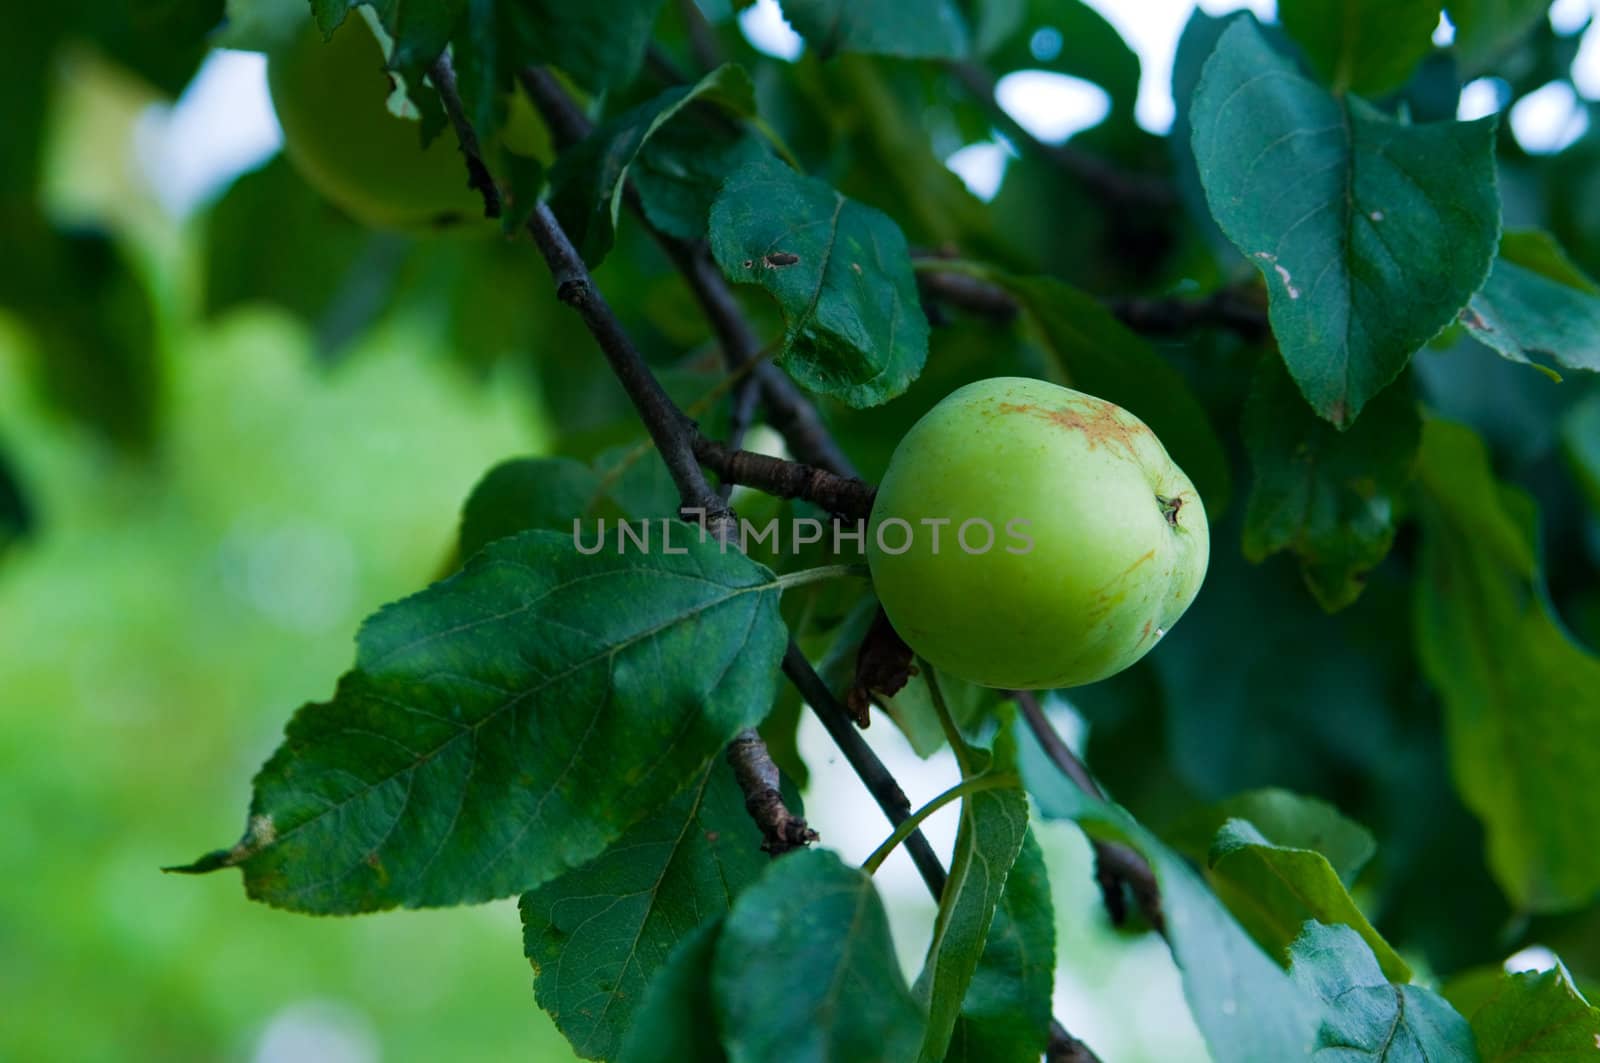 The picture of the apple in the home garden